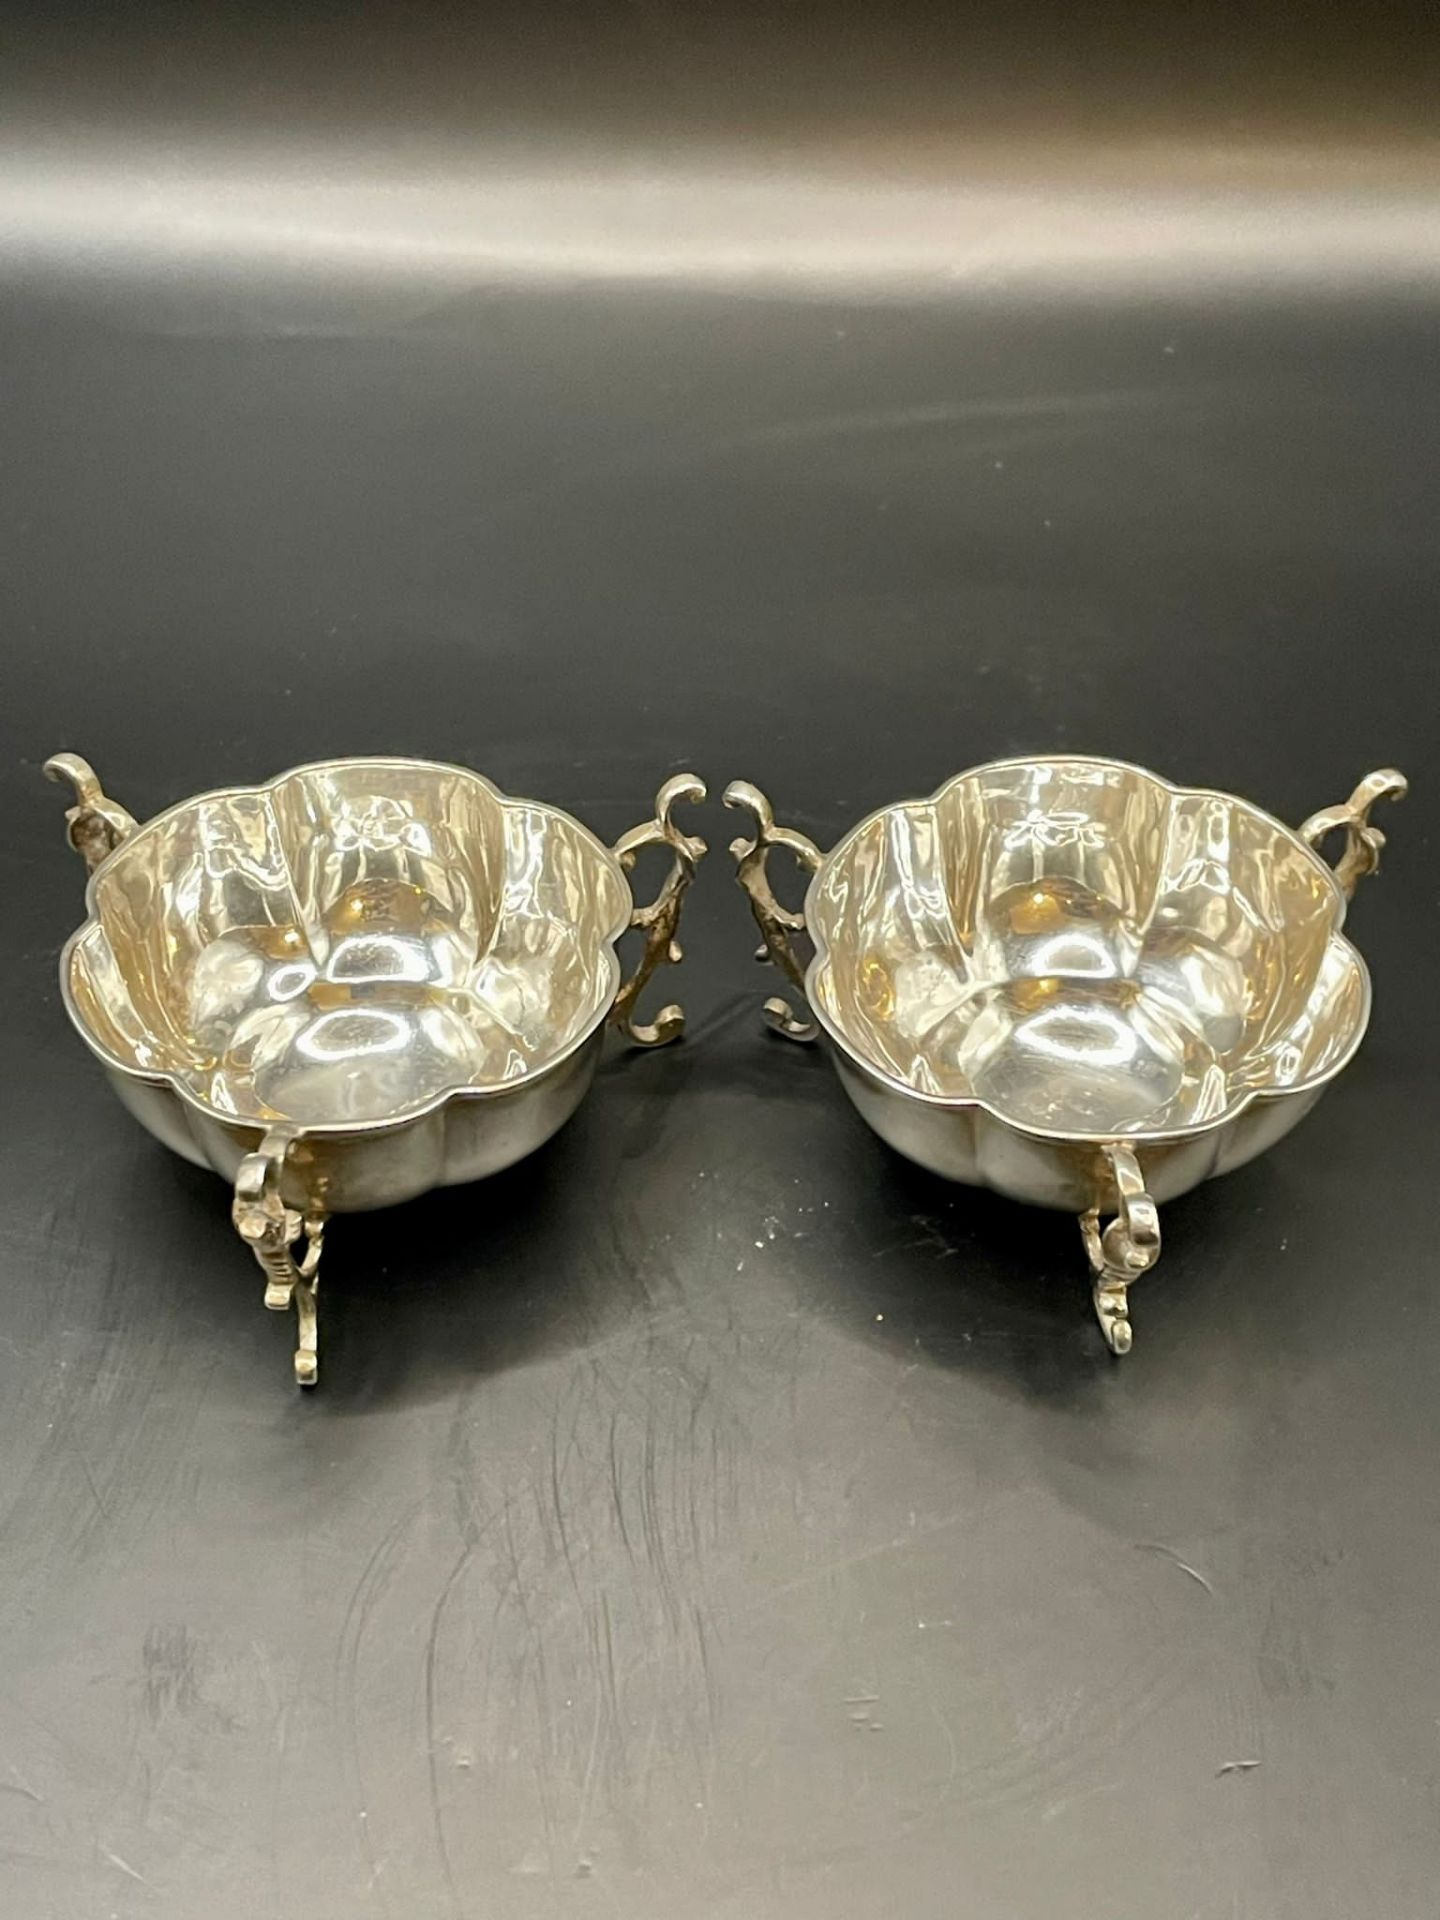 Antique Solid Silver Salt Dishes Fully Hallmarked .- JD over WD in lozenge for James Deakin & Sons J - Image 15 of 15